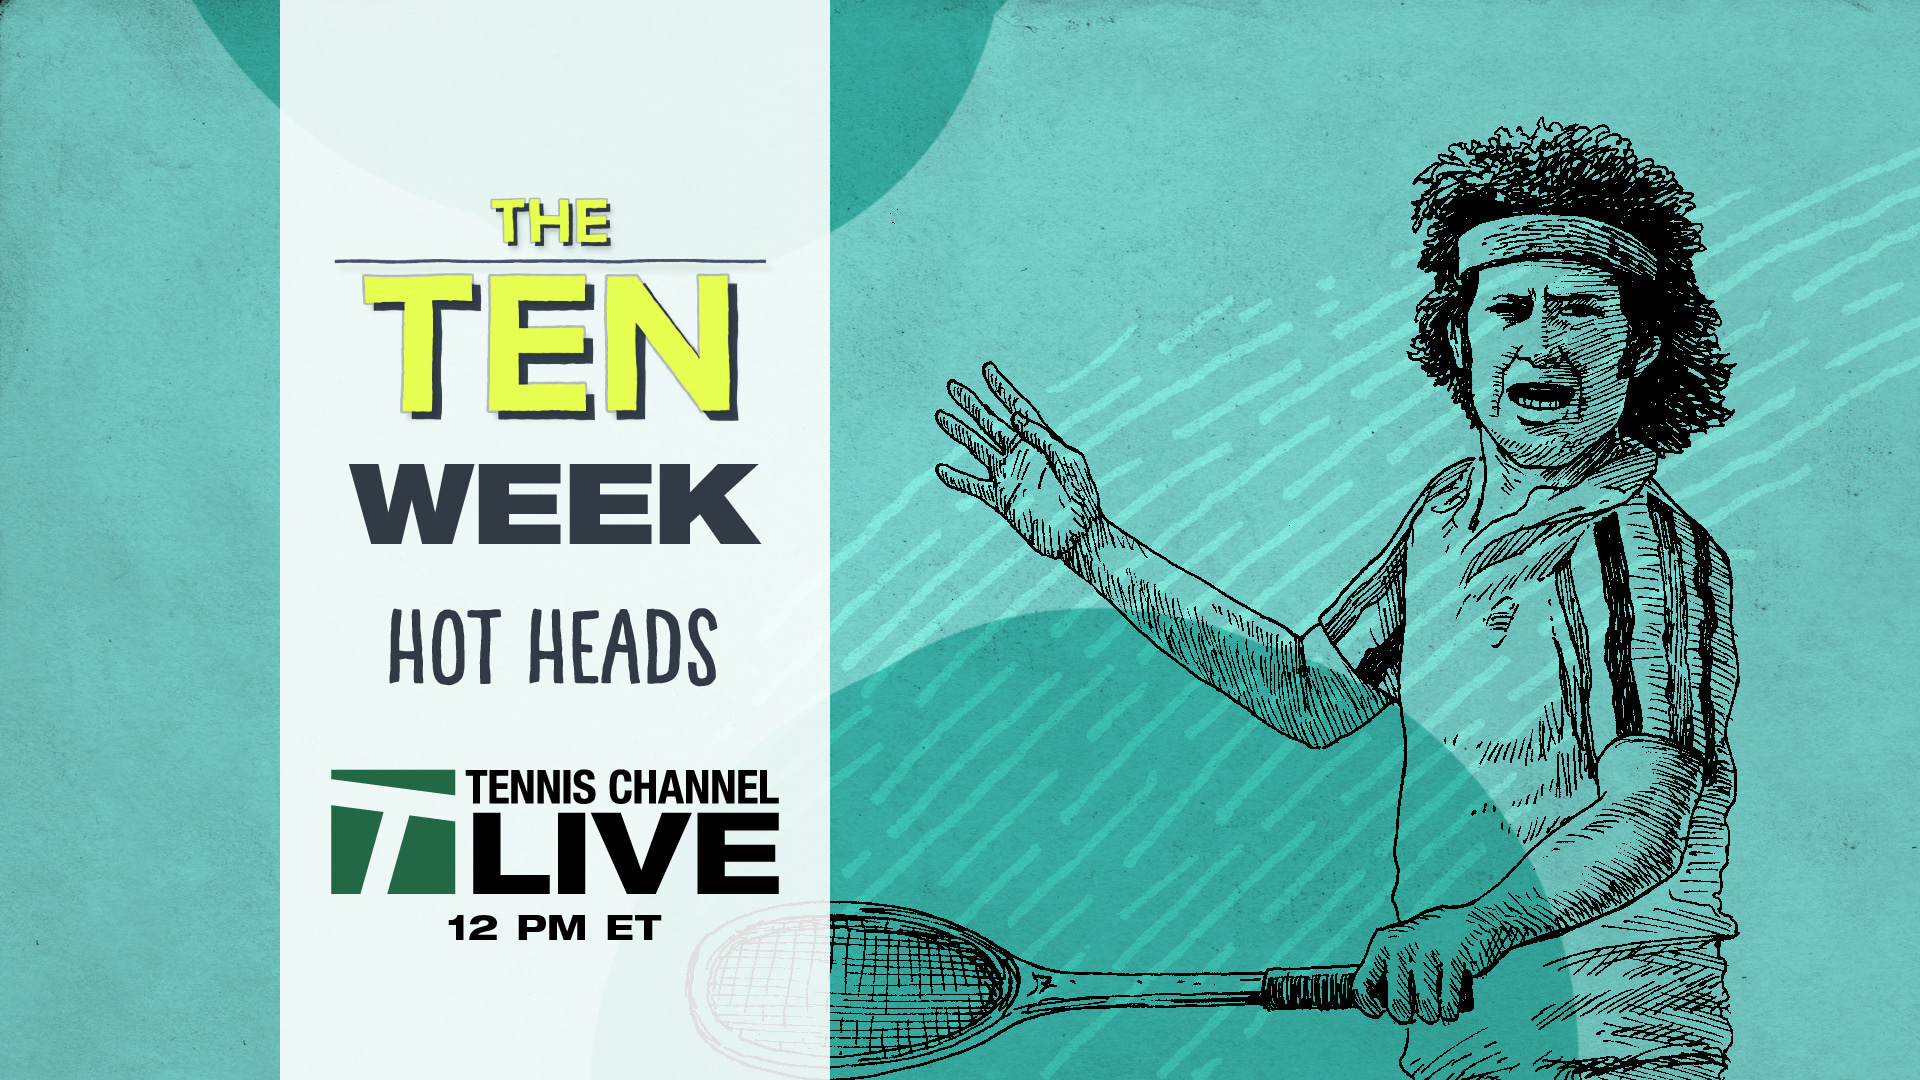 WATCH FULL EPISODE—Tennis Channel Live, May 14 The Ten, Hotheads